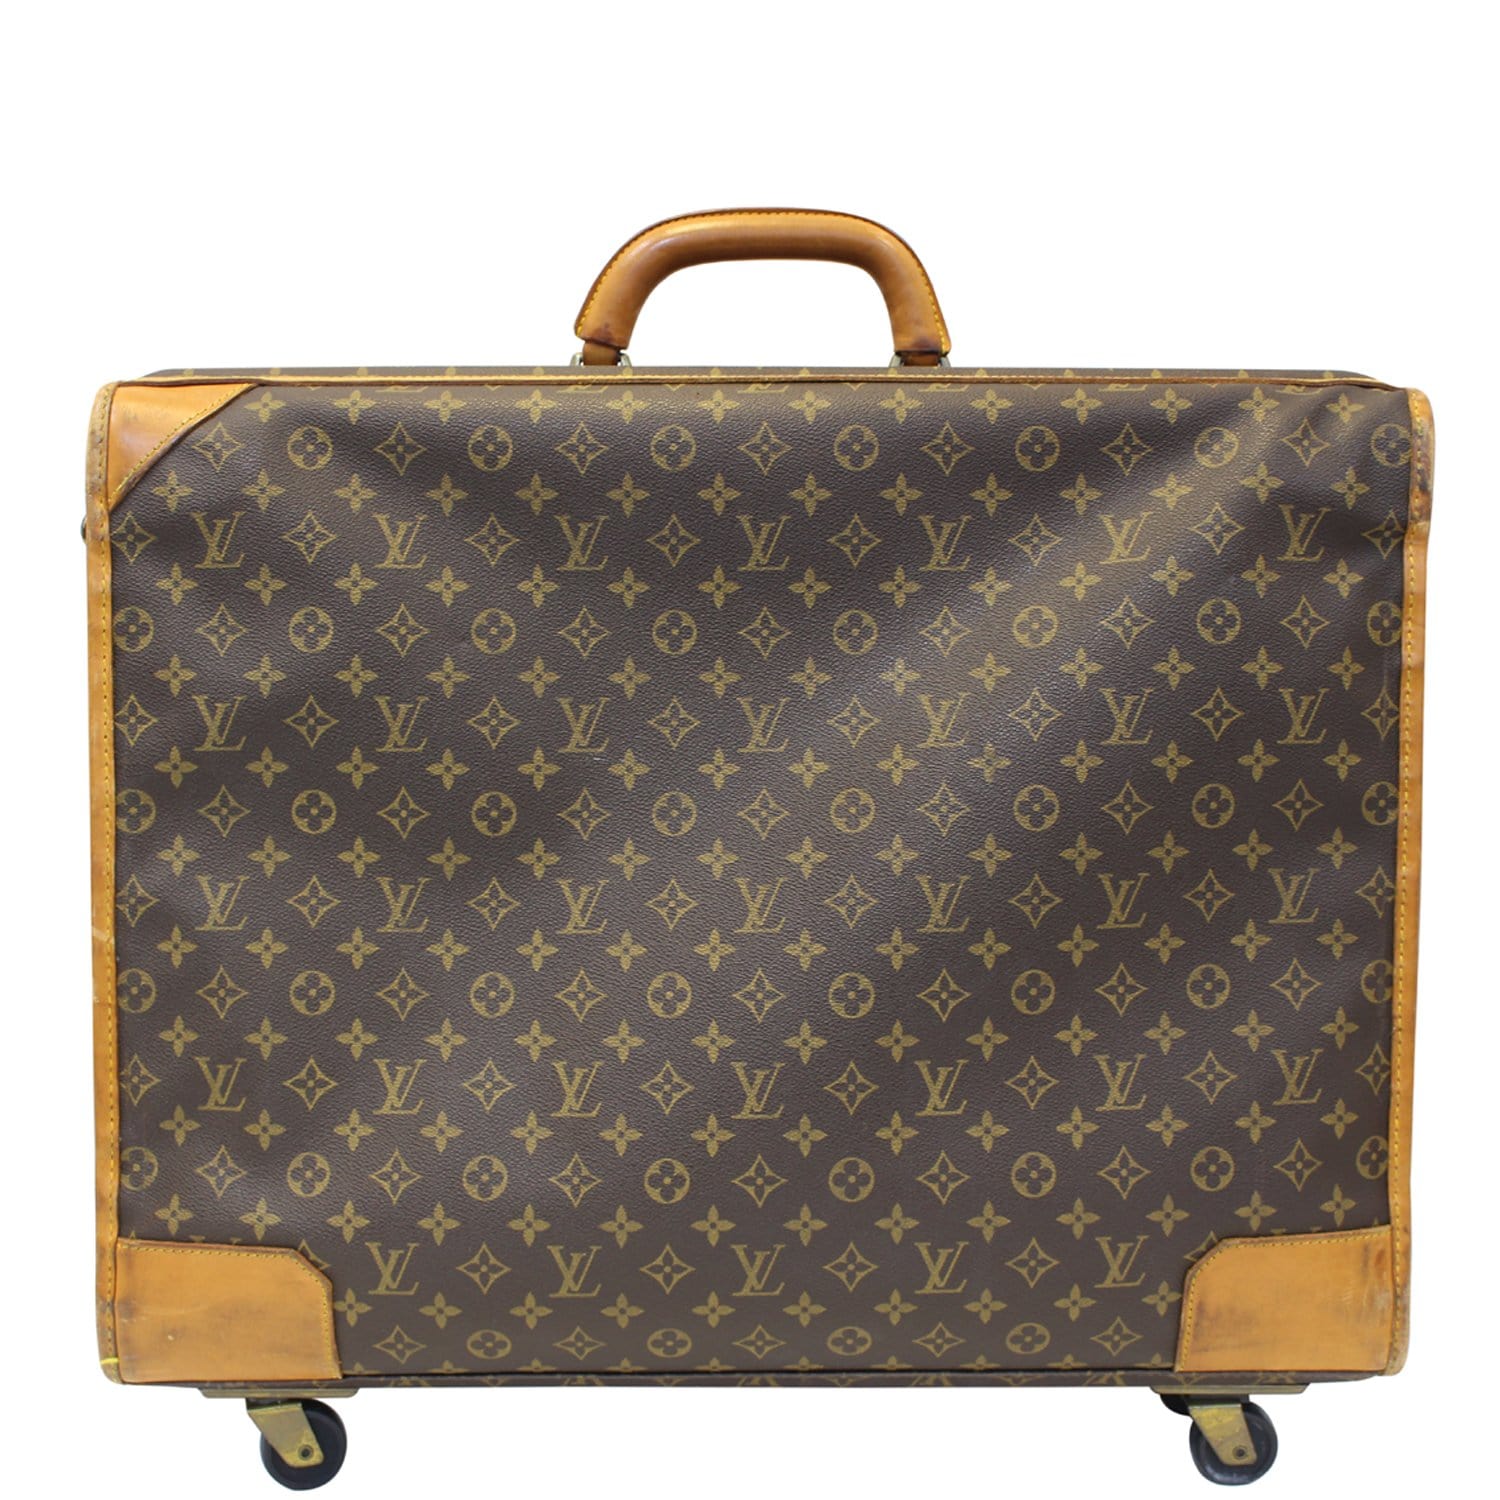 Louis Vuitton antique bags and suitcases are displayed in a